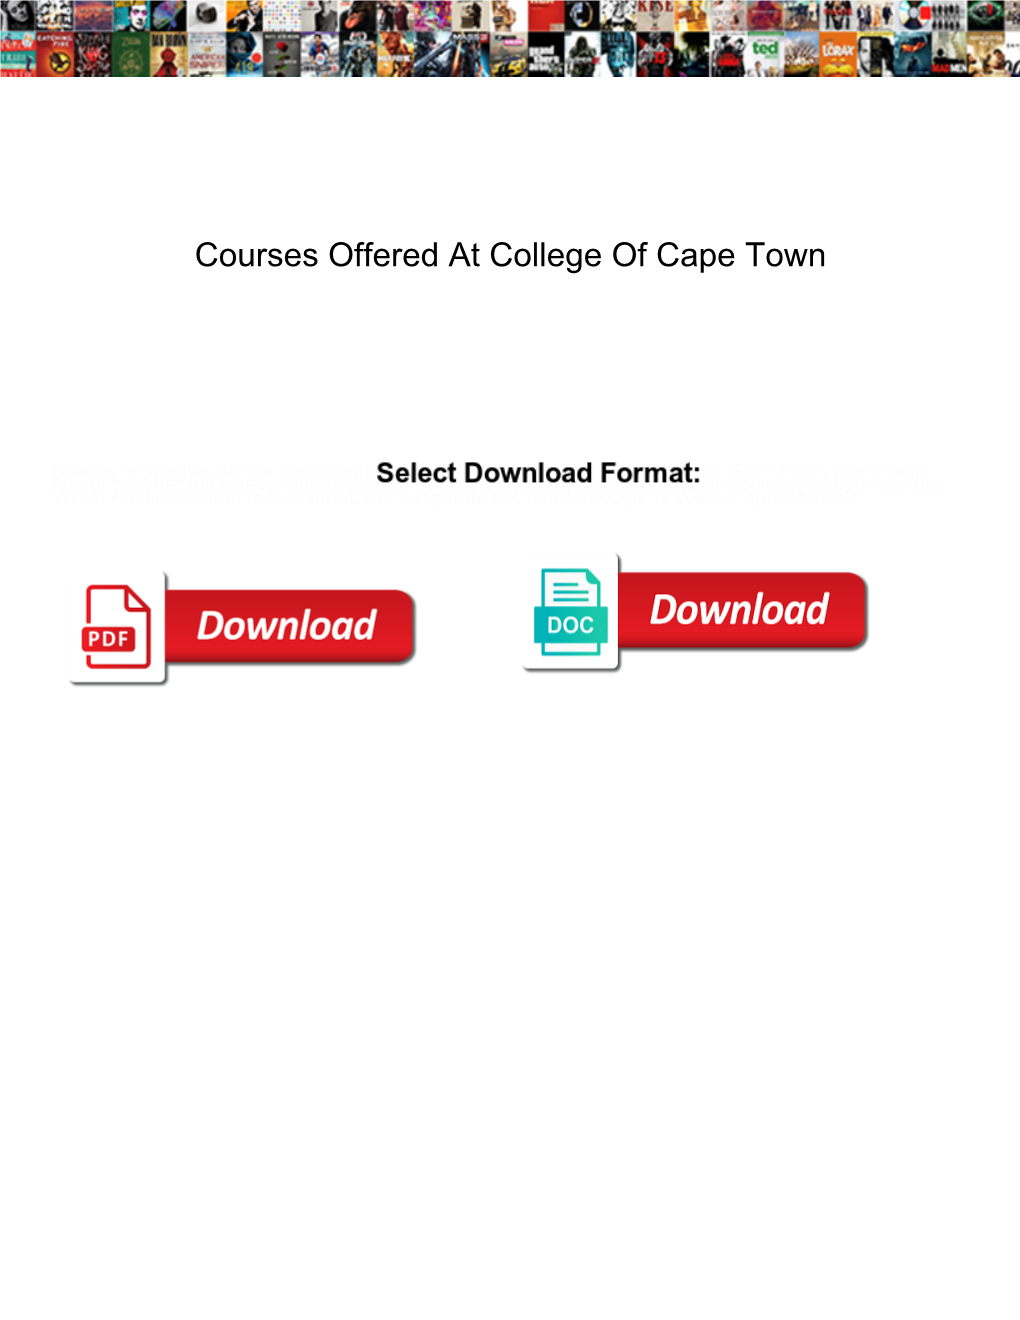 Courses Offered at College of Cape Town